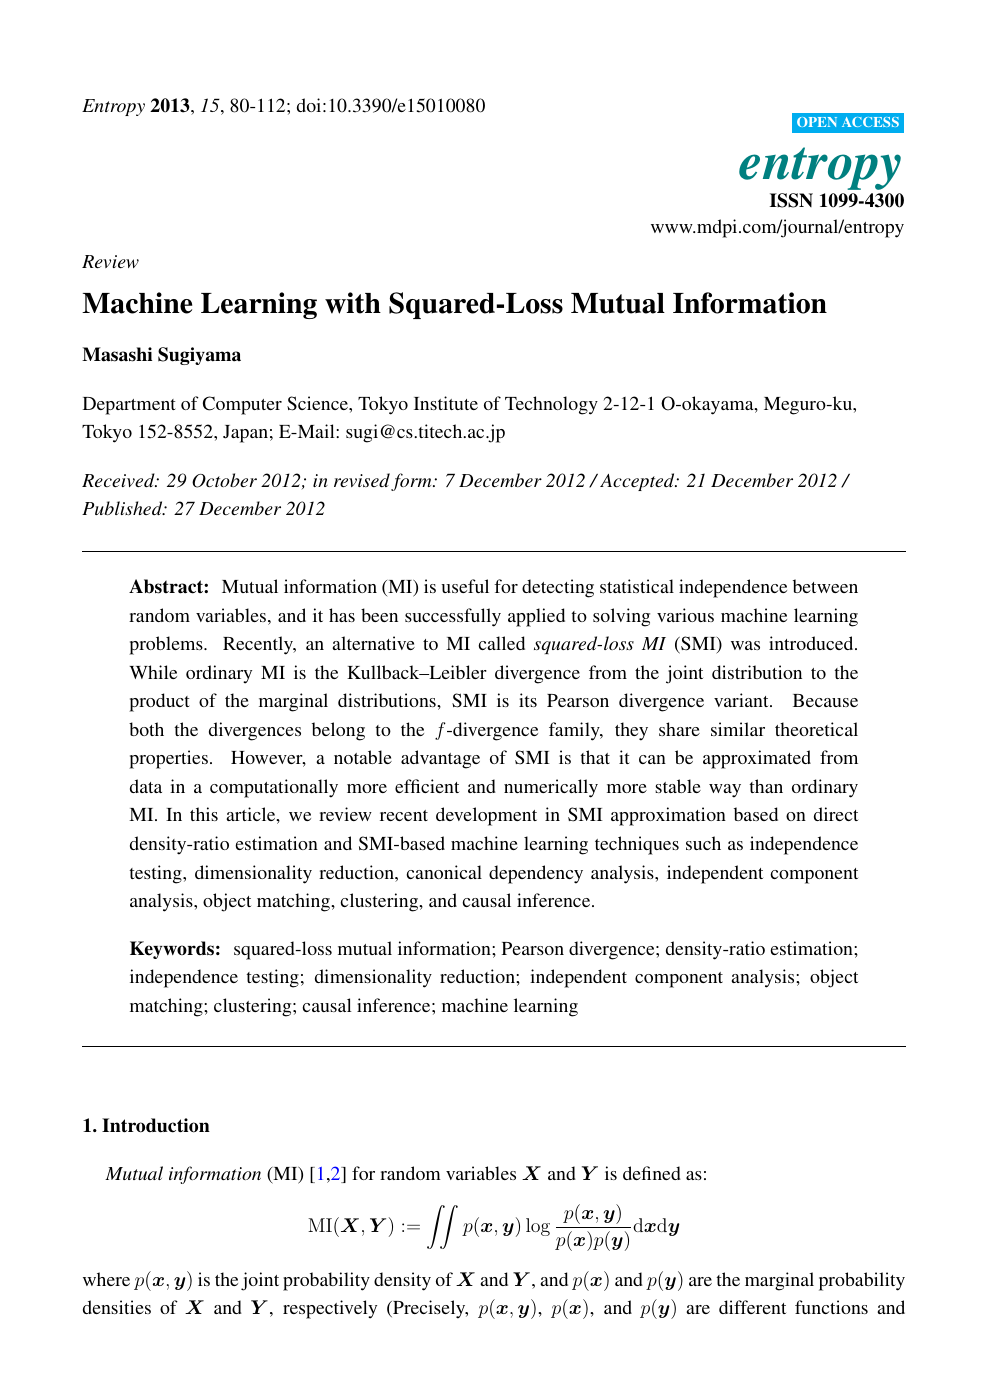 Machine Learning With Squared Loss Mutual Information Topic Of Research Paper In Computer And Information Sciences Download Scholarly Article Pdf And Read For Free On Cyberleninka Open Science Hub